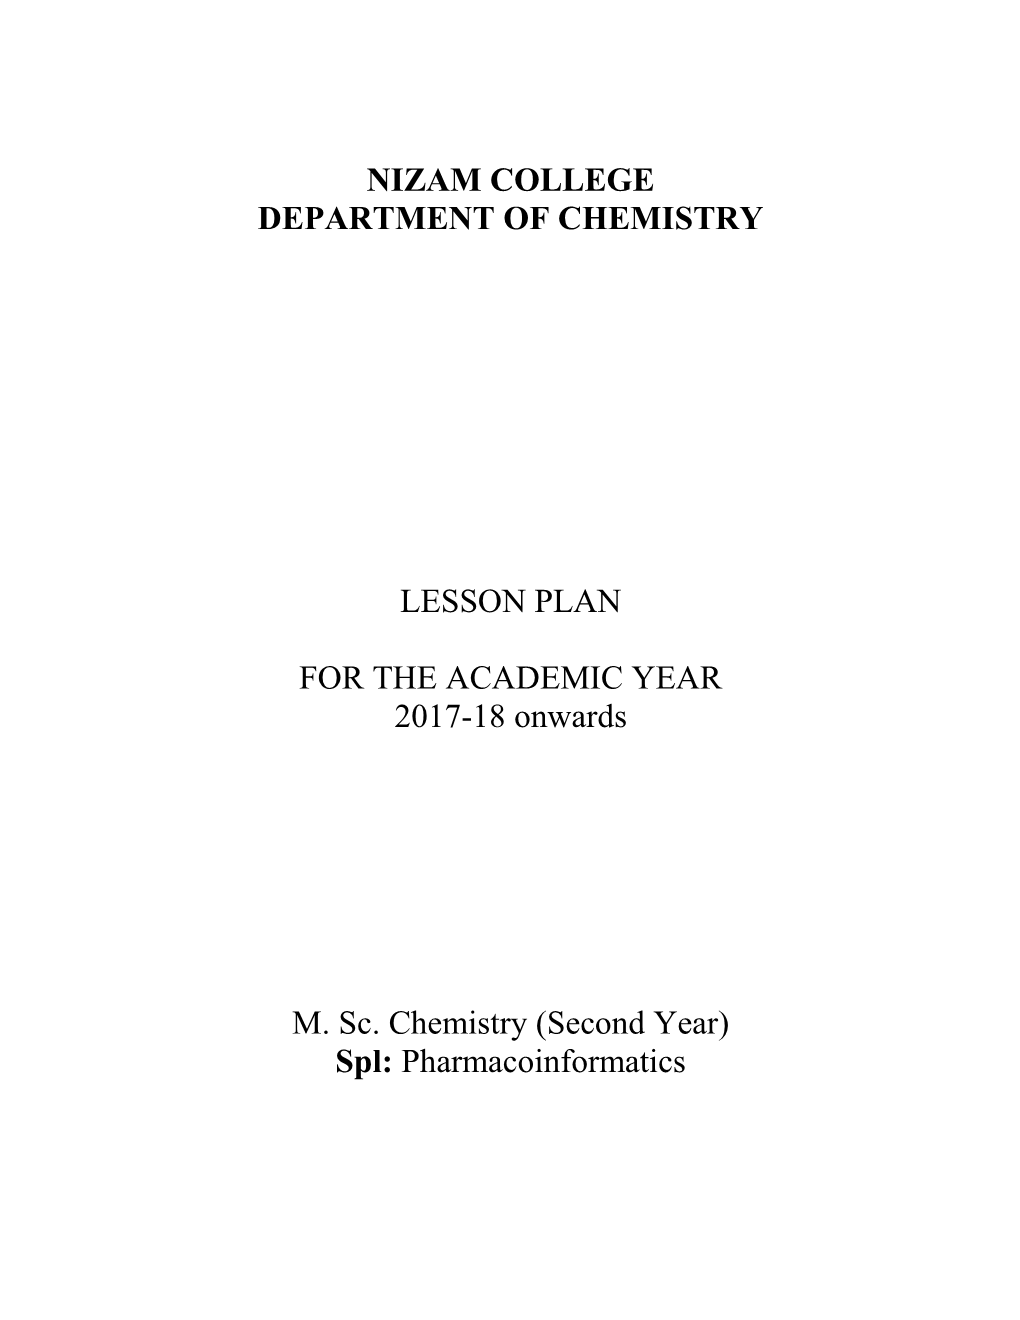 Nizam College Department of Chemistry Lesson Plan For